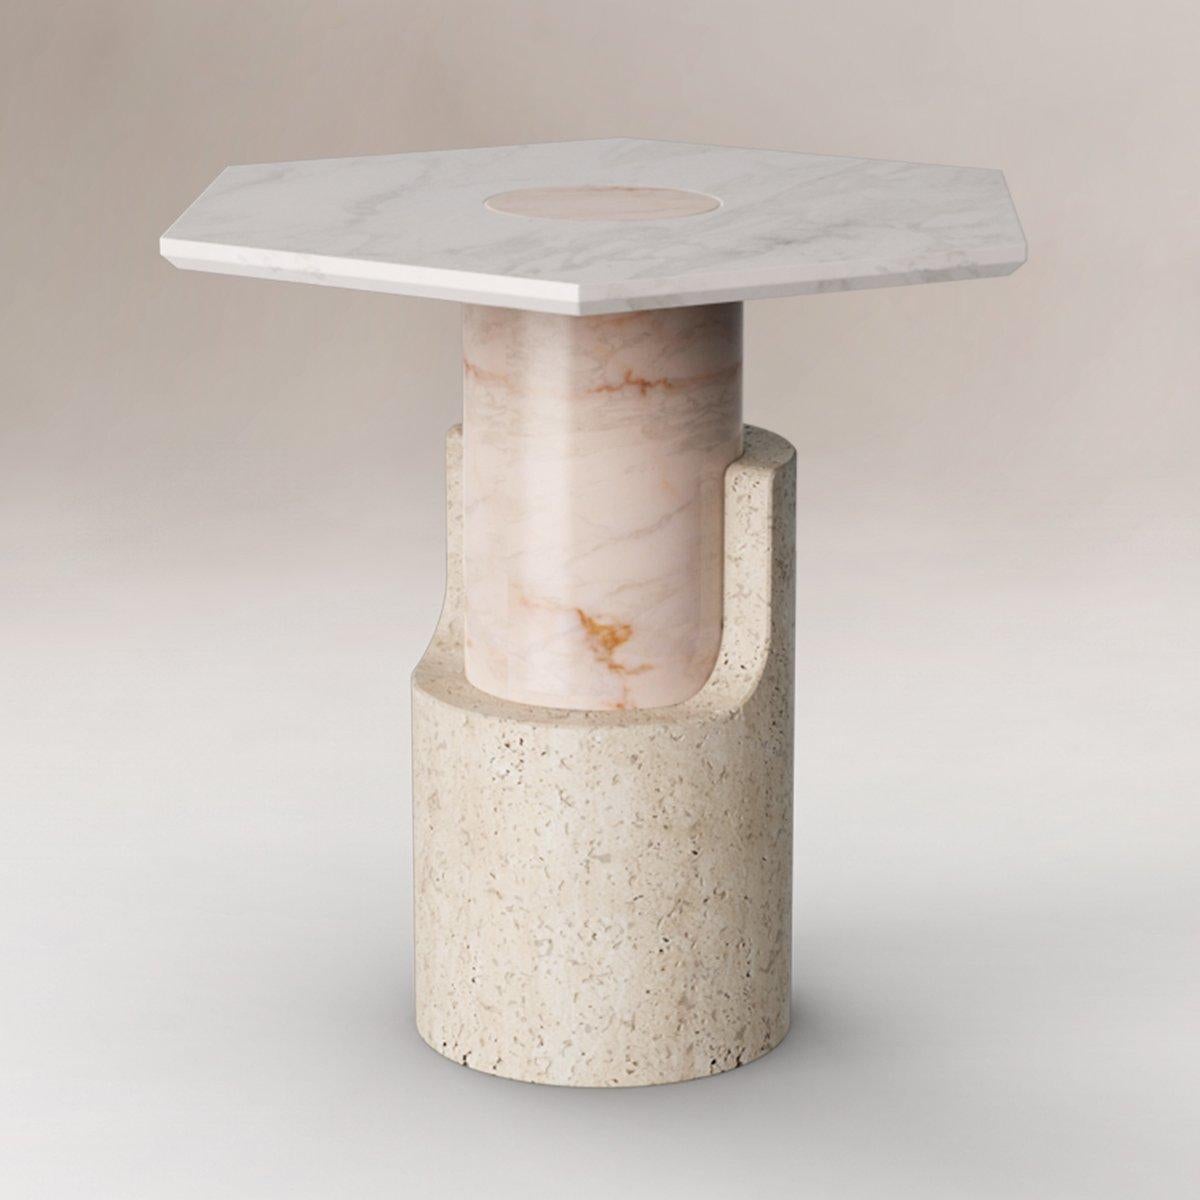 Braque Contemporary Marble Side Table by Dooq

Dimensions
W 60 x D 60 x H 55 cm

Materials & Finishes
Entirely hand made in marble

Product
The Braque side table is an elegant and slick side table created by Dooq. Braque is entirely hand made in